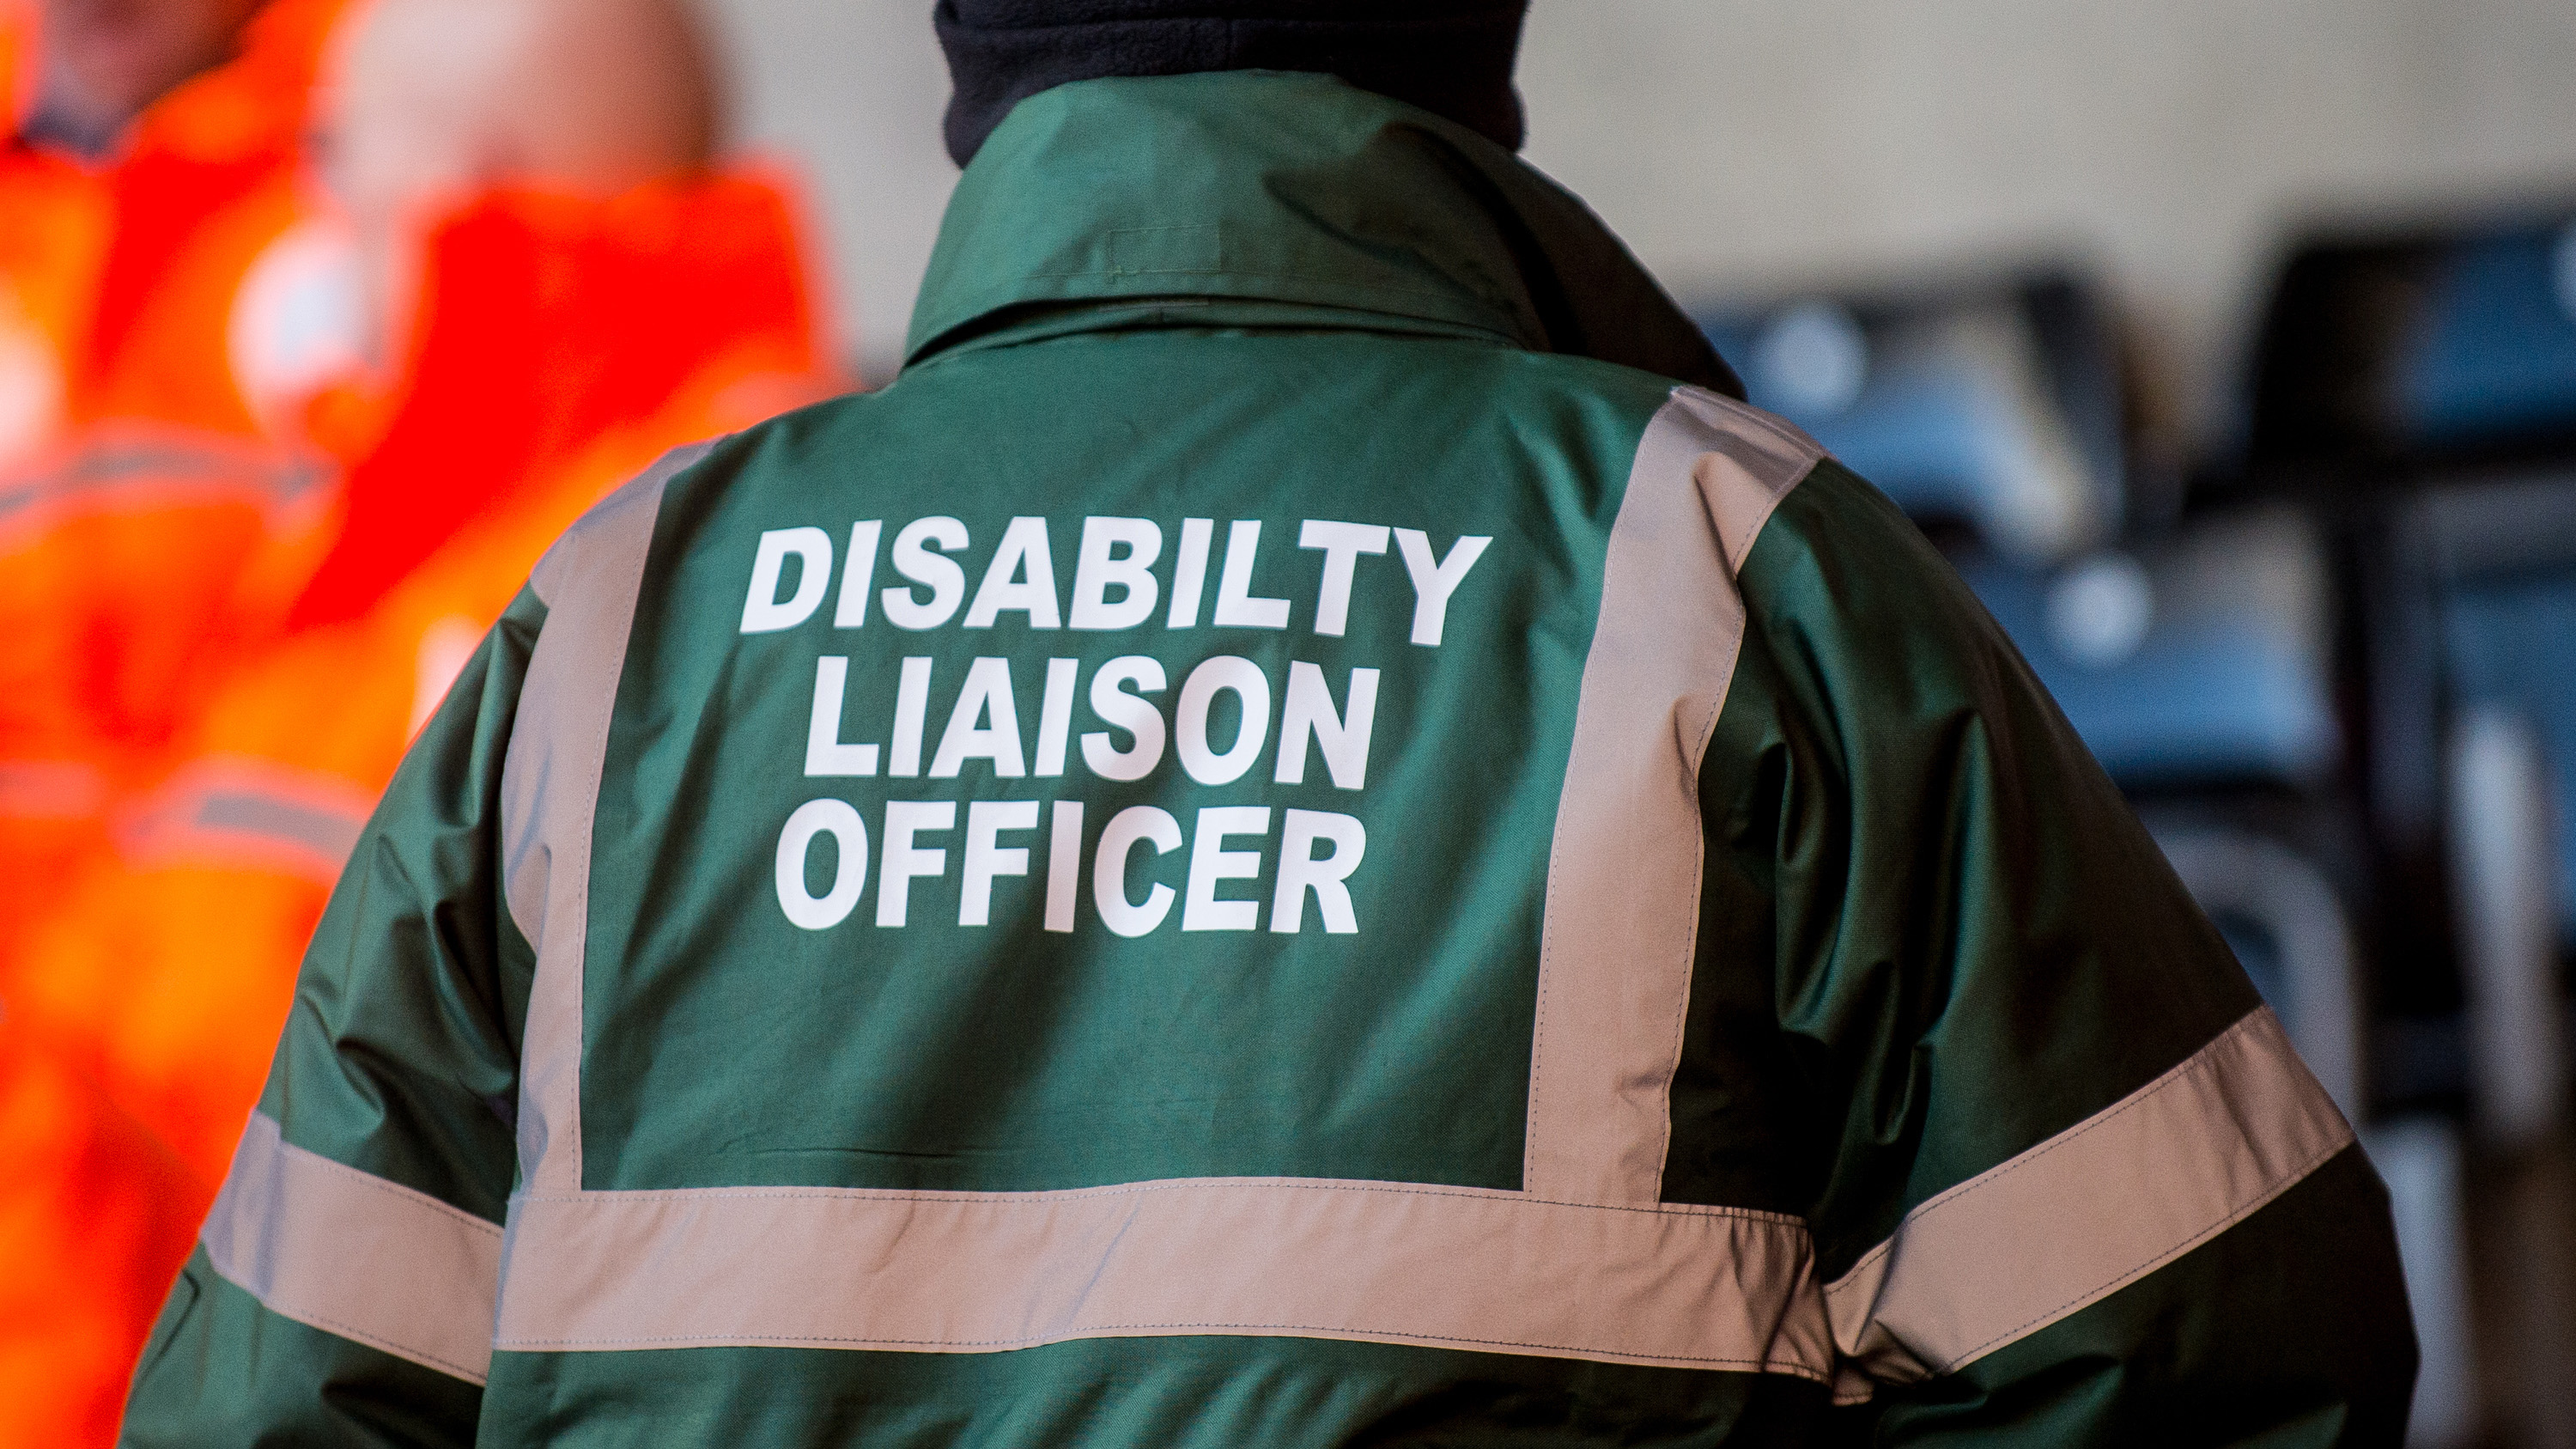 image of the back of a green disability liason officer's jacket